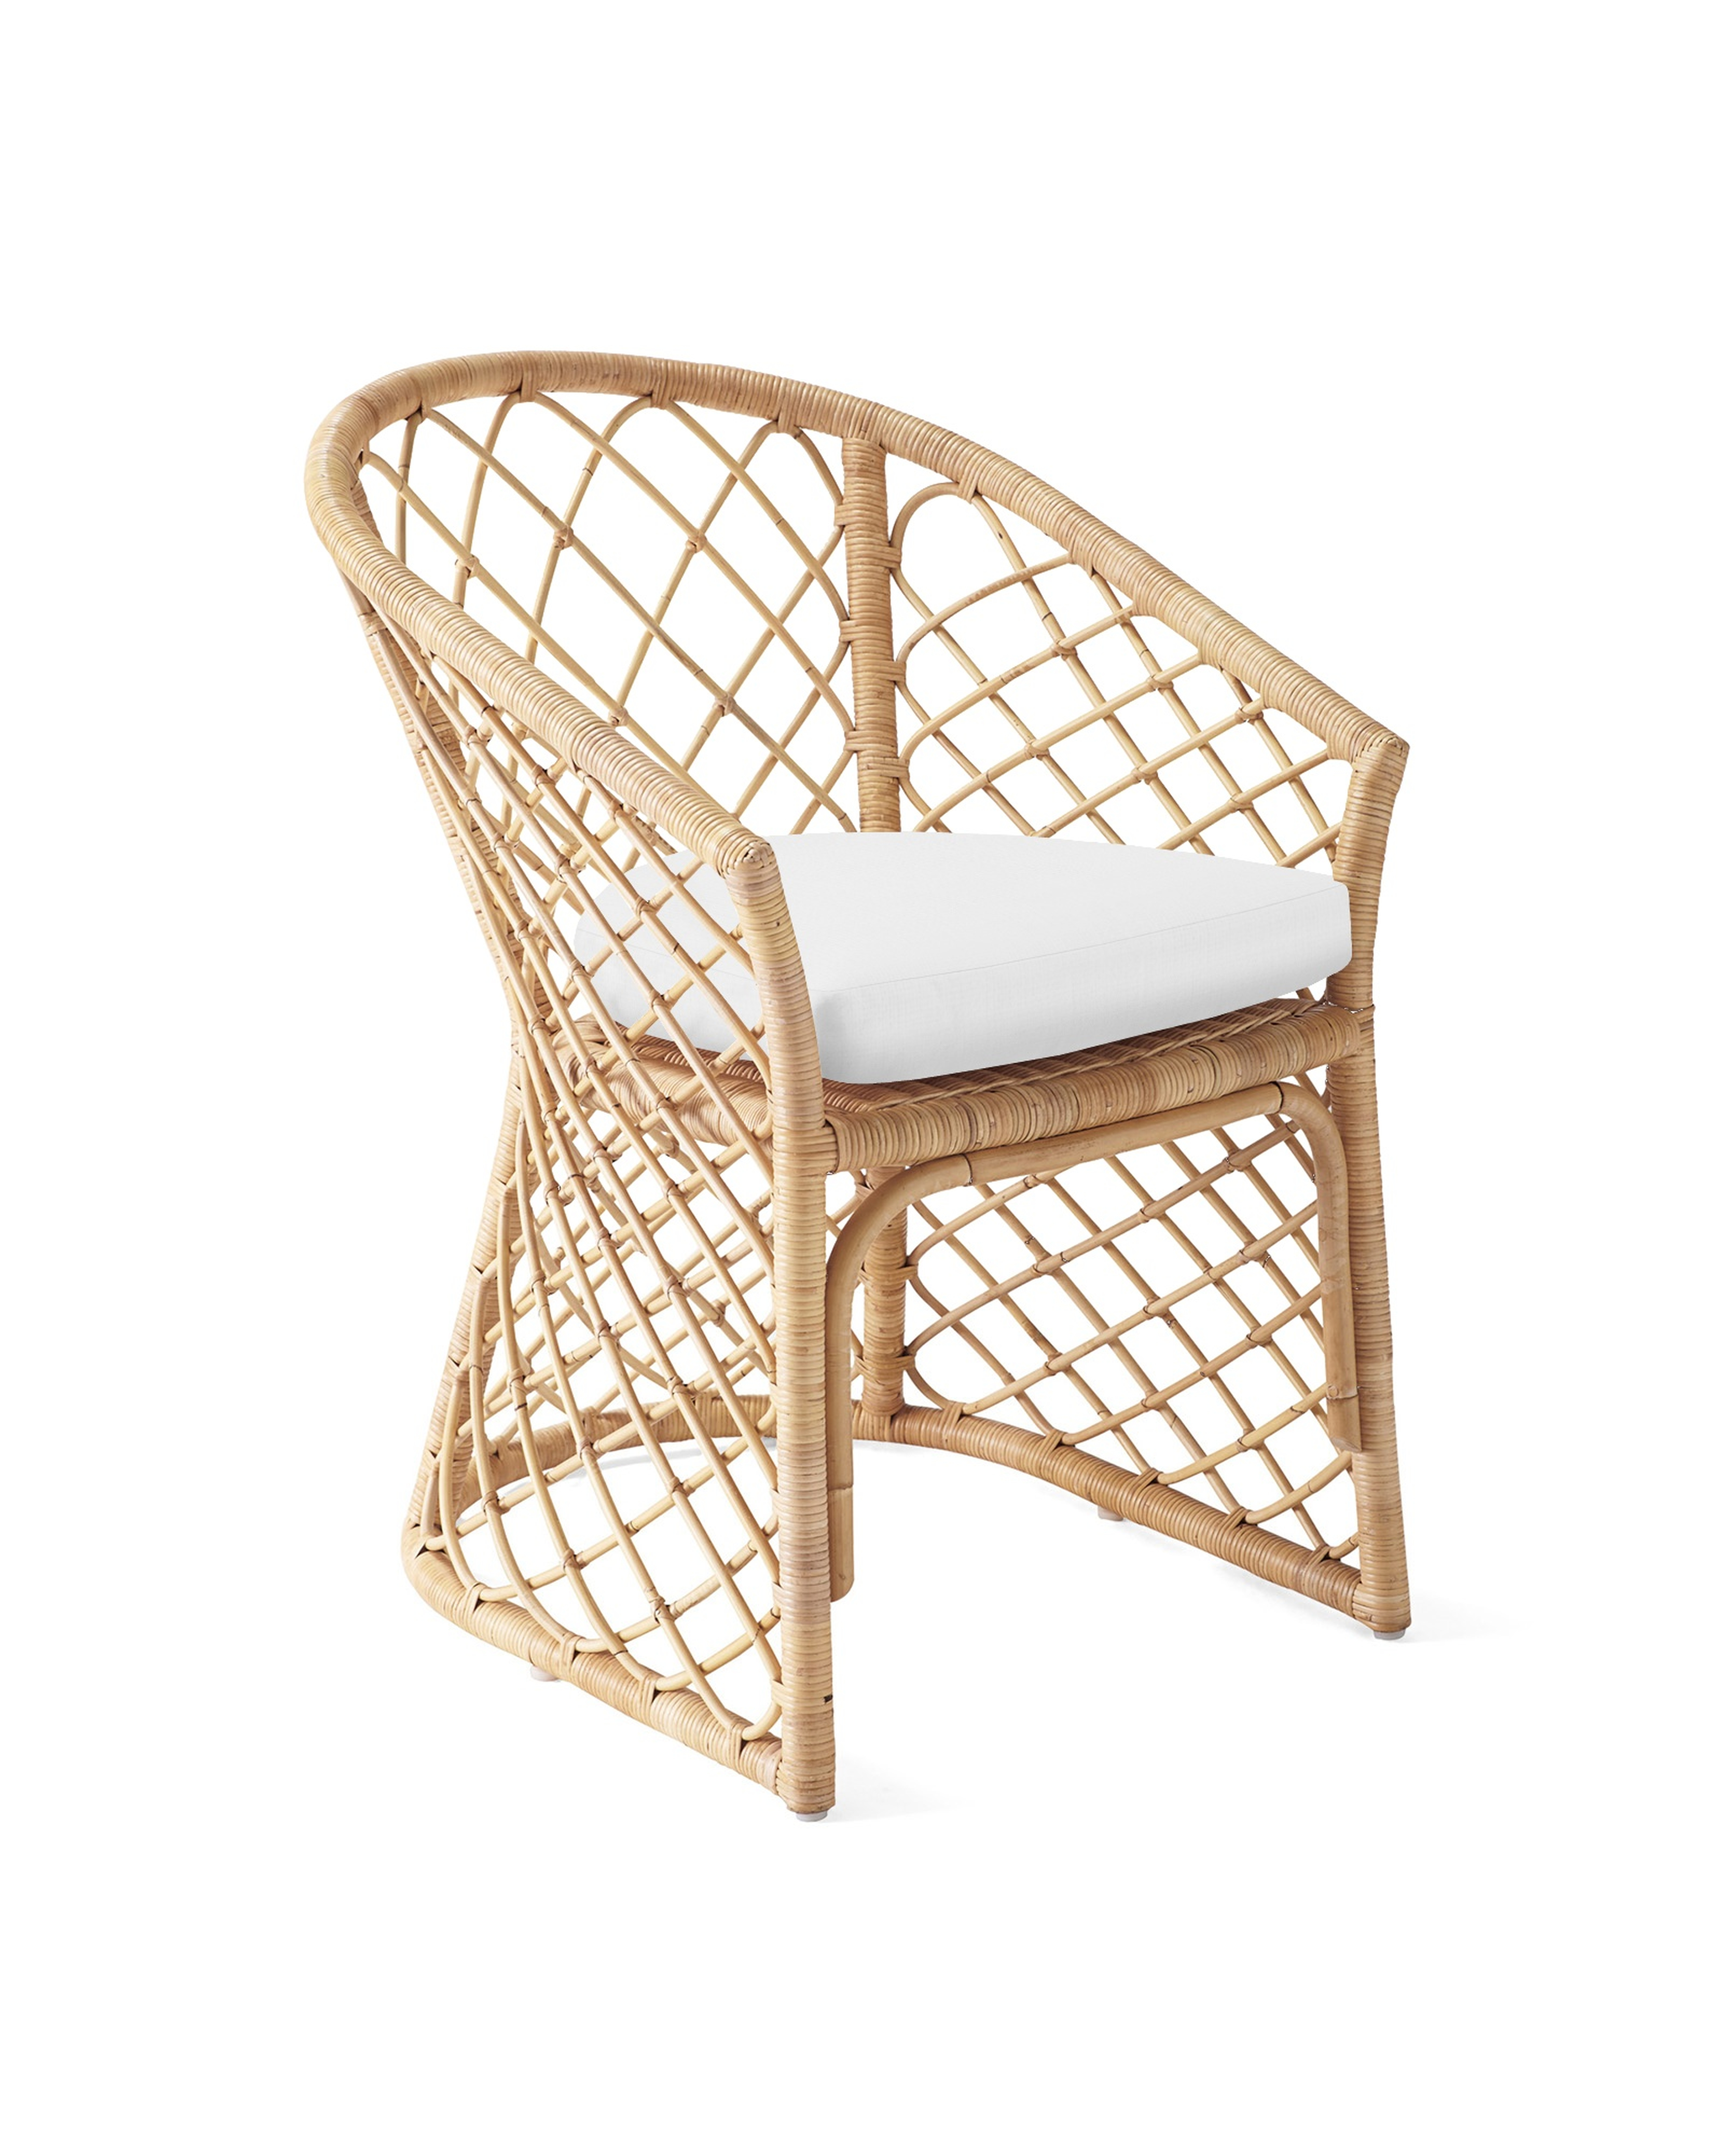 Avalon Rattan Dining Chair - Natural - Serena and Lily